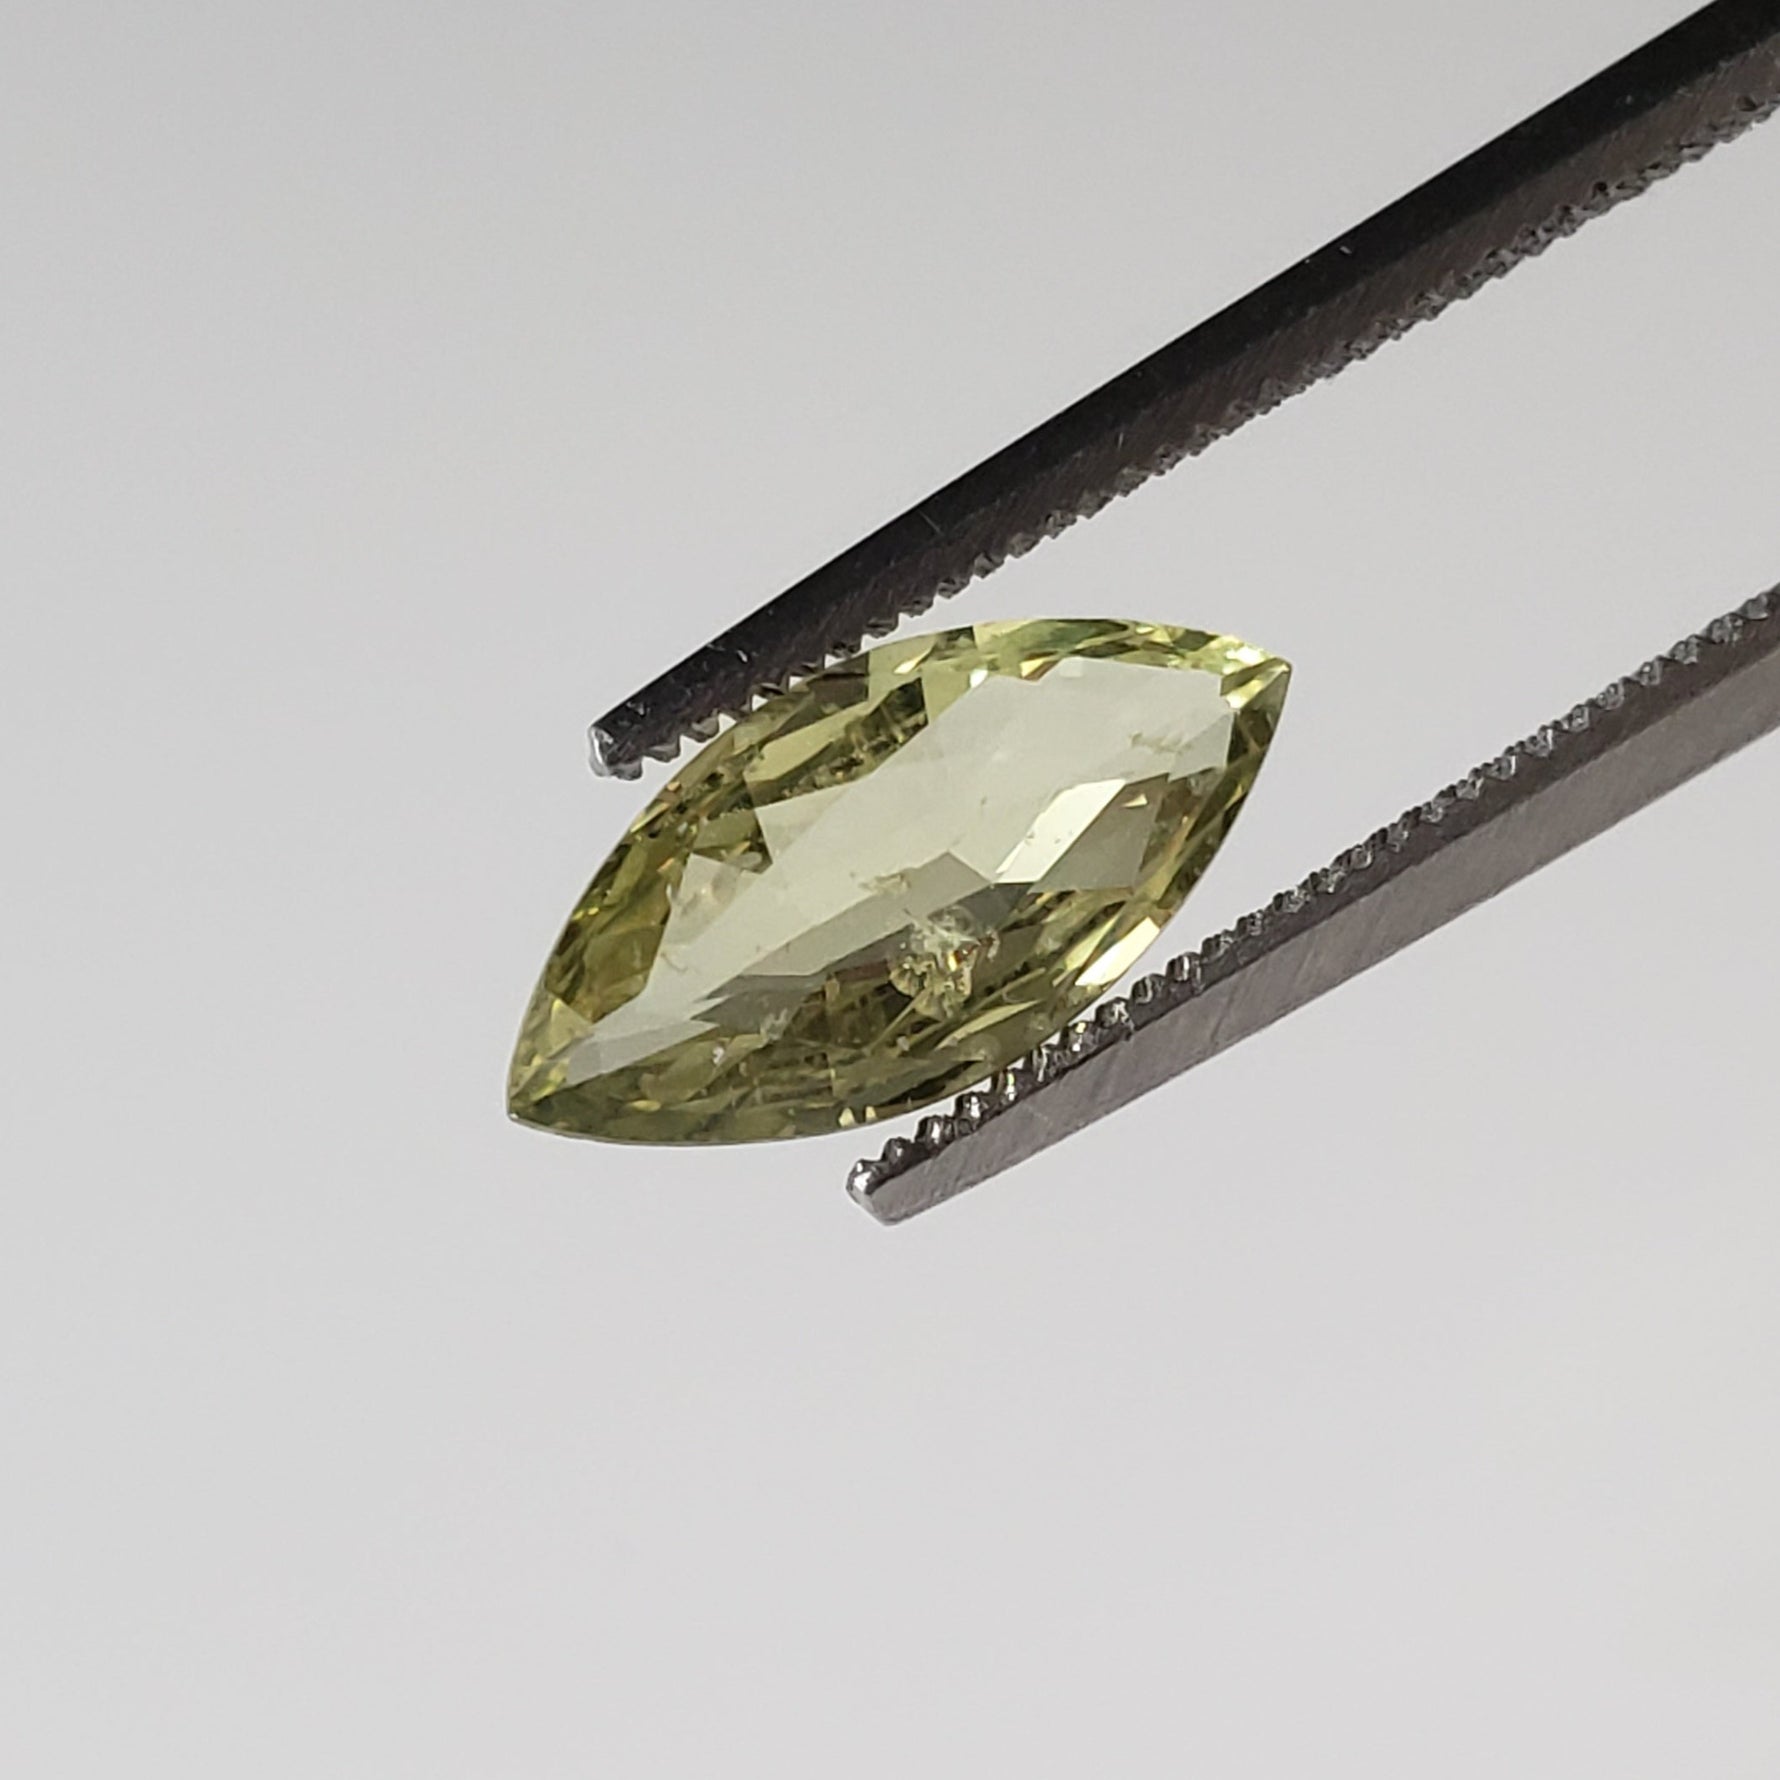 Sapphire | Marquise Cut | Lime Green | 11.2x5.4mm 1.44ct